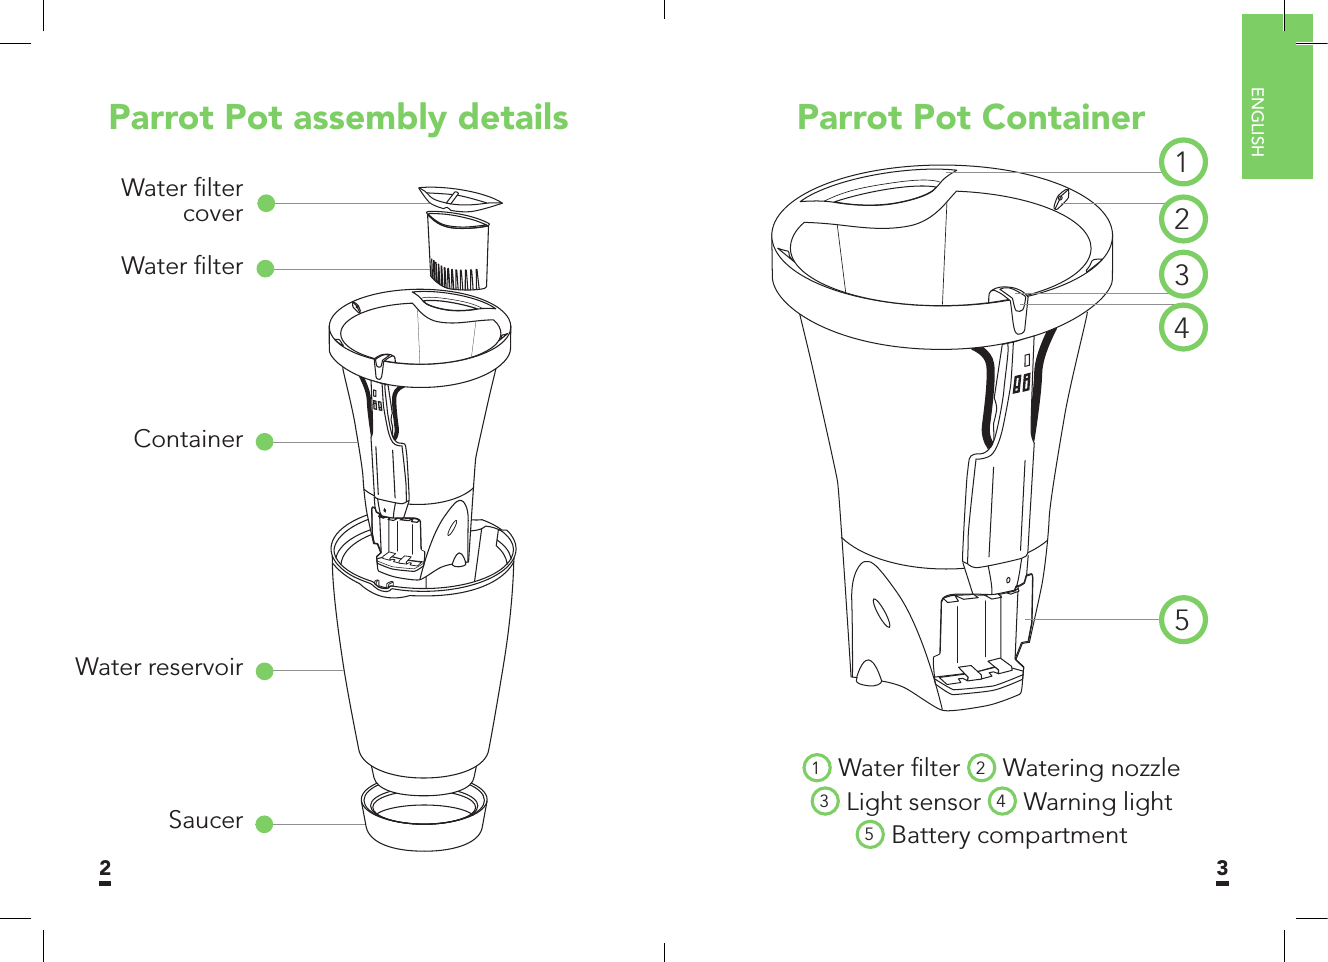 ENGLISH2 3ContainerWater ﬁlter coverWater reservoirSaucerParrot Pot assembly detailsWater ﬁlter1 Water ﬁlter 2 Watering nozzle3 Light sensor  4 Warning light5 Battery compartment12435Parrot Pot Container